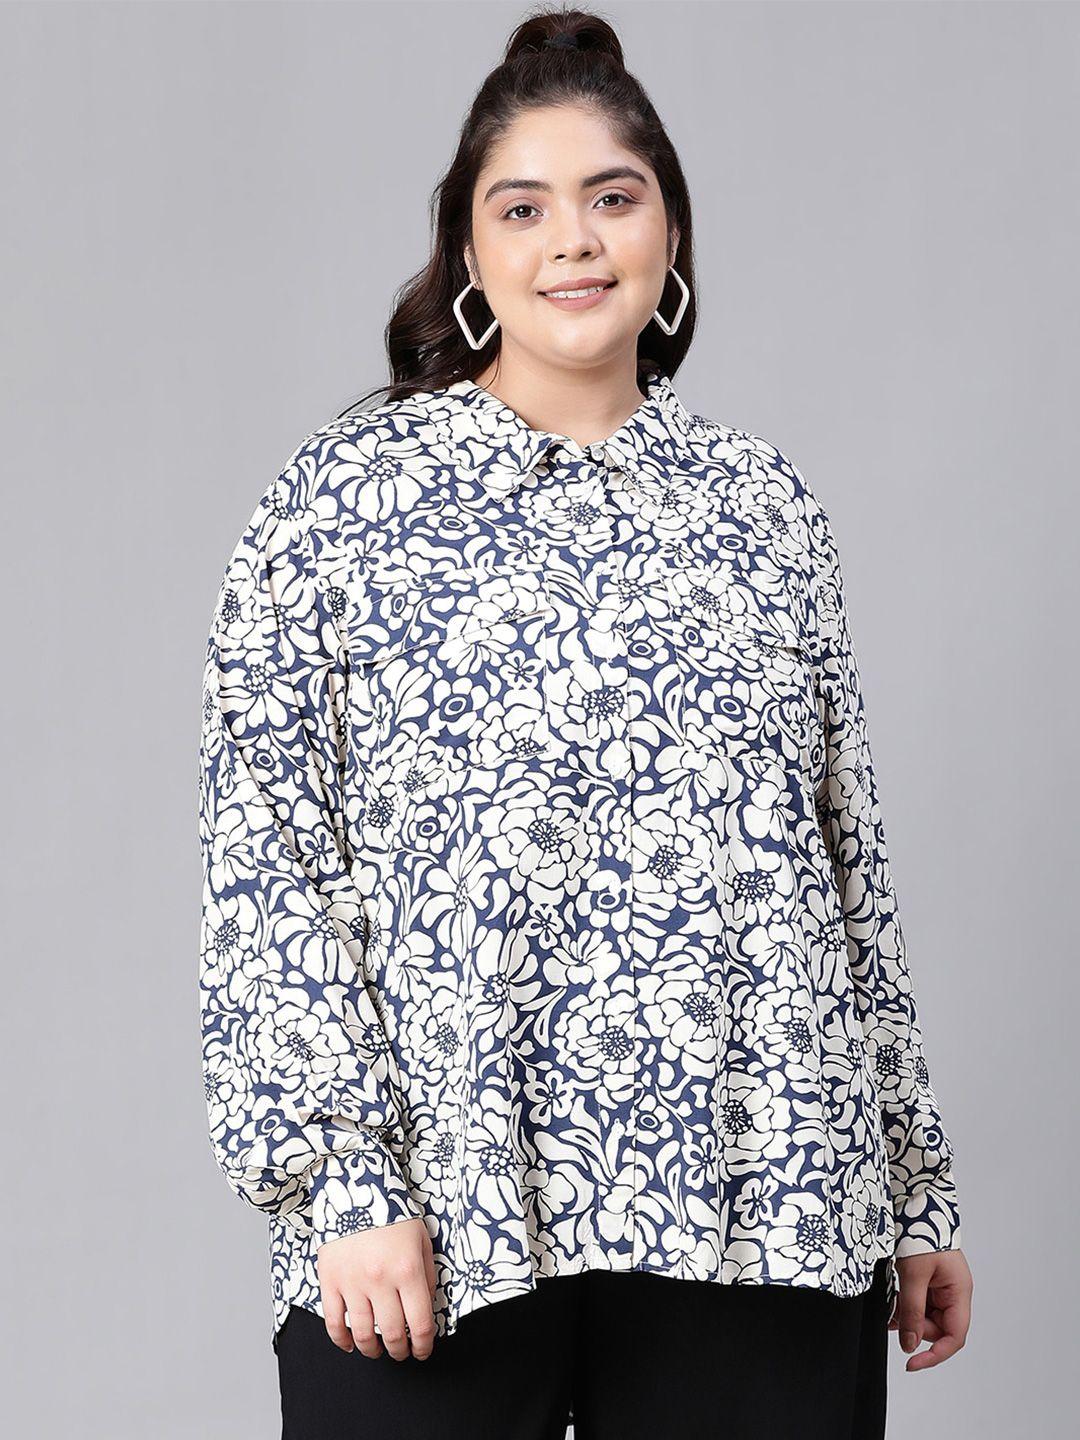 oxolloxo-plus-size-relaxed-fit-floral-printed-casual-shirt